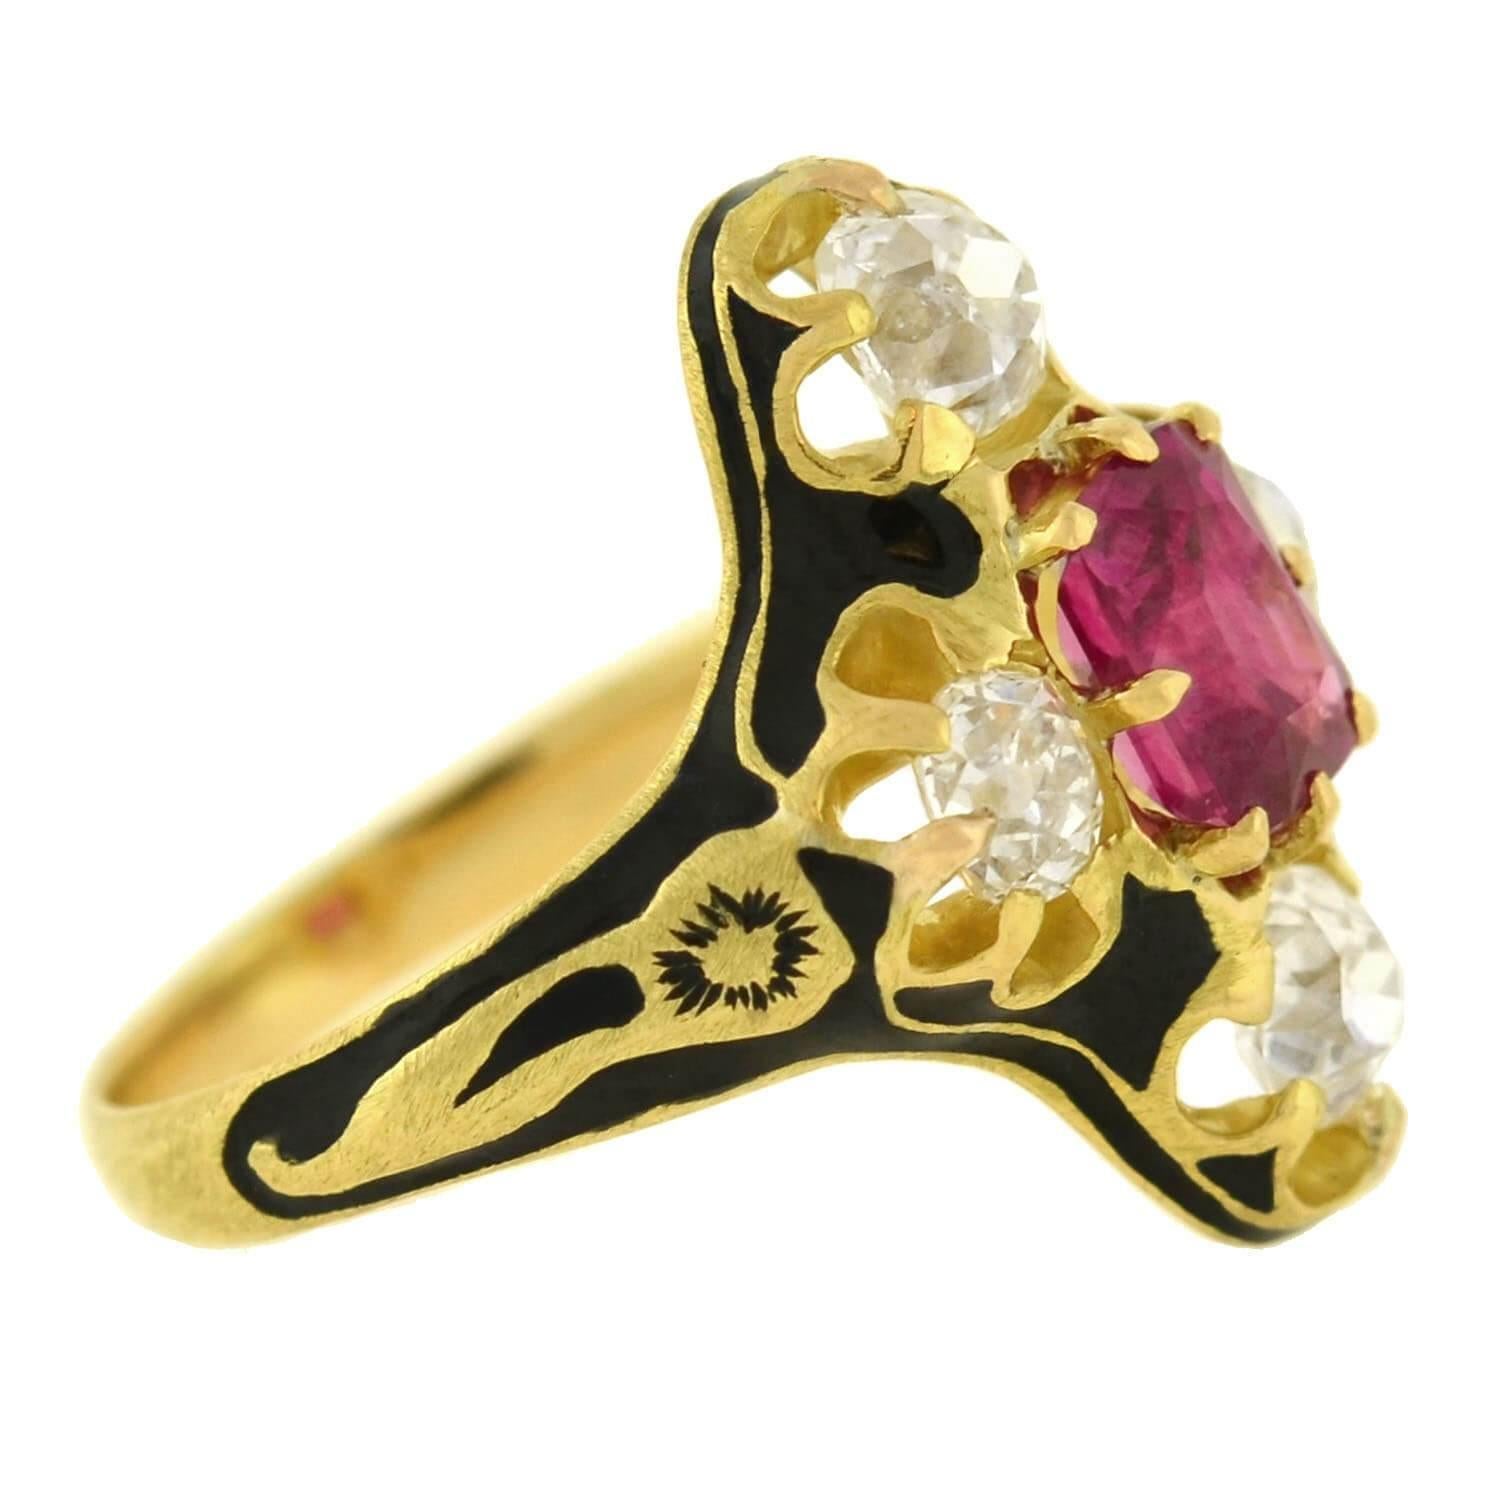 An outstanding gemstone ring from the Victorian (ca1880) era! This incredible piece is crafted in vibrant 18kt gold, and has an elongated navette-style setting. Resting at the center is a gorgeous non-heated natural Burma ruby, which is a mixed